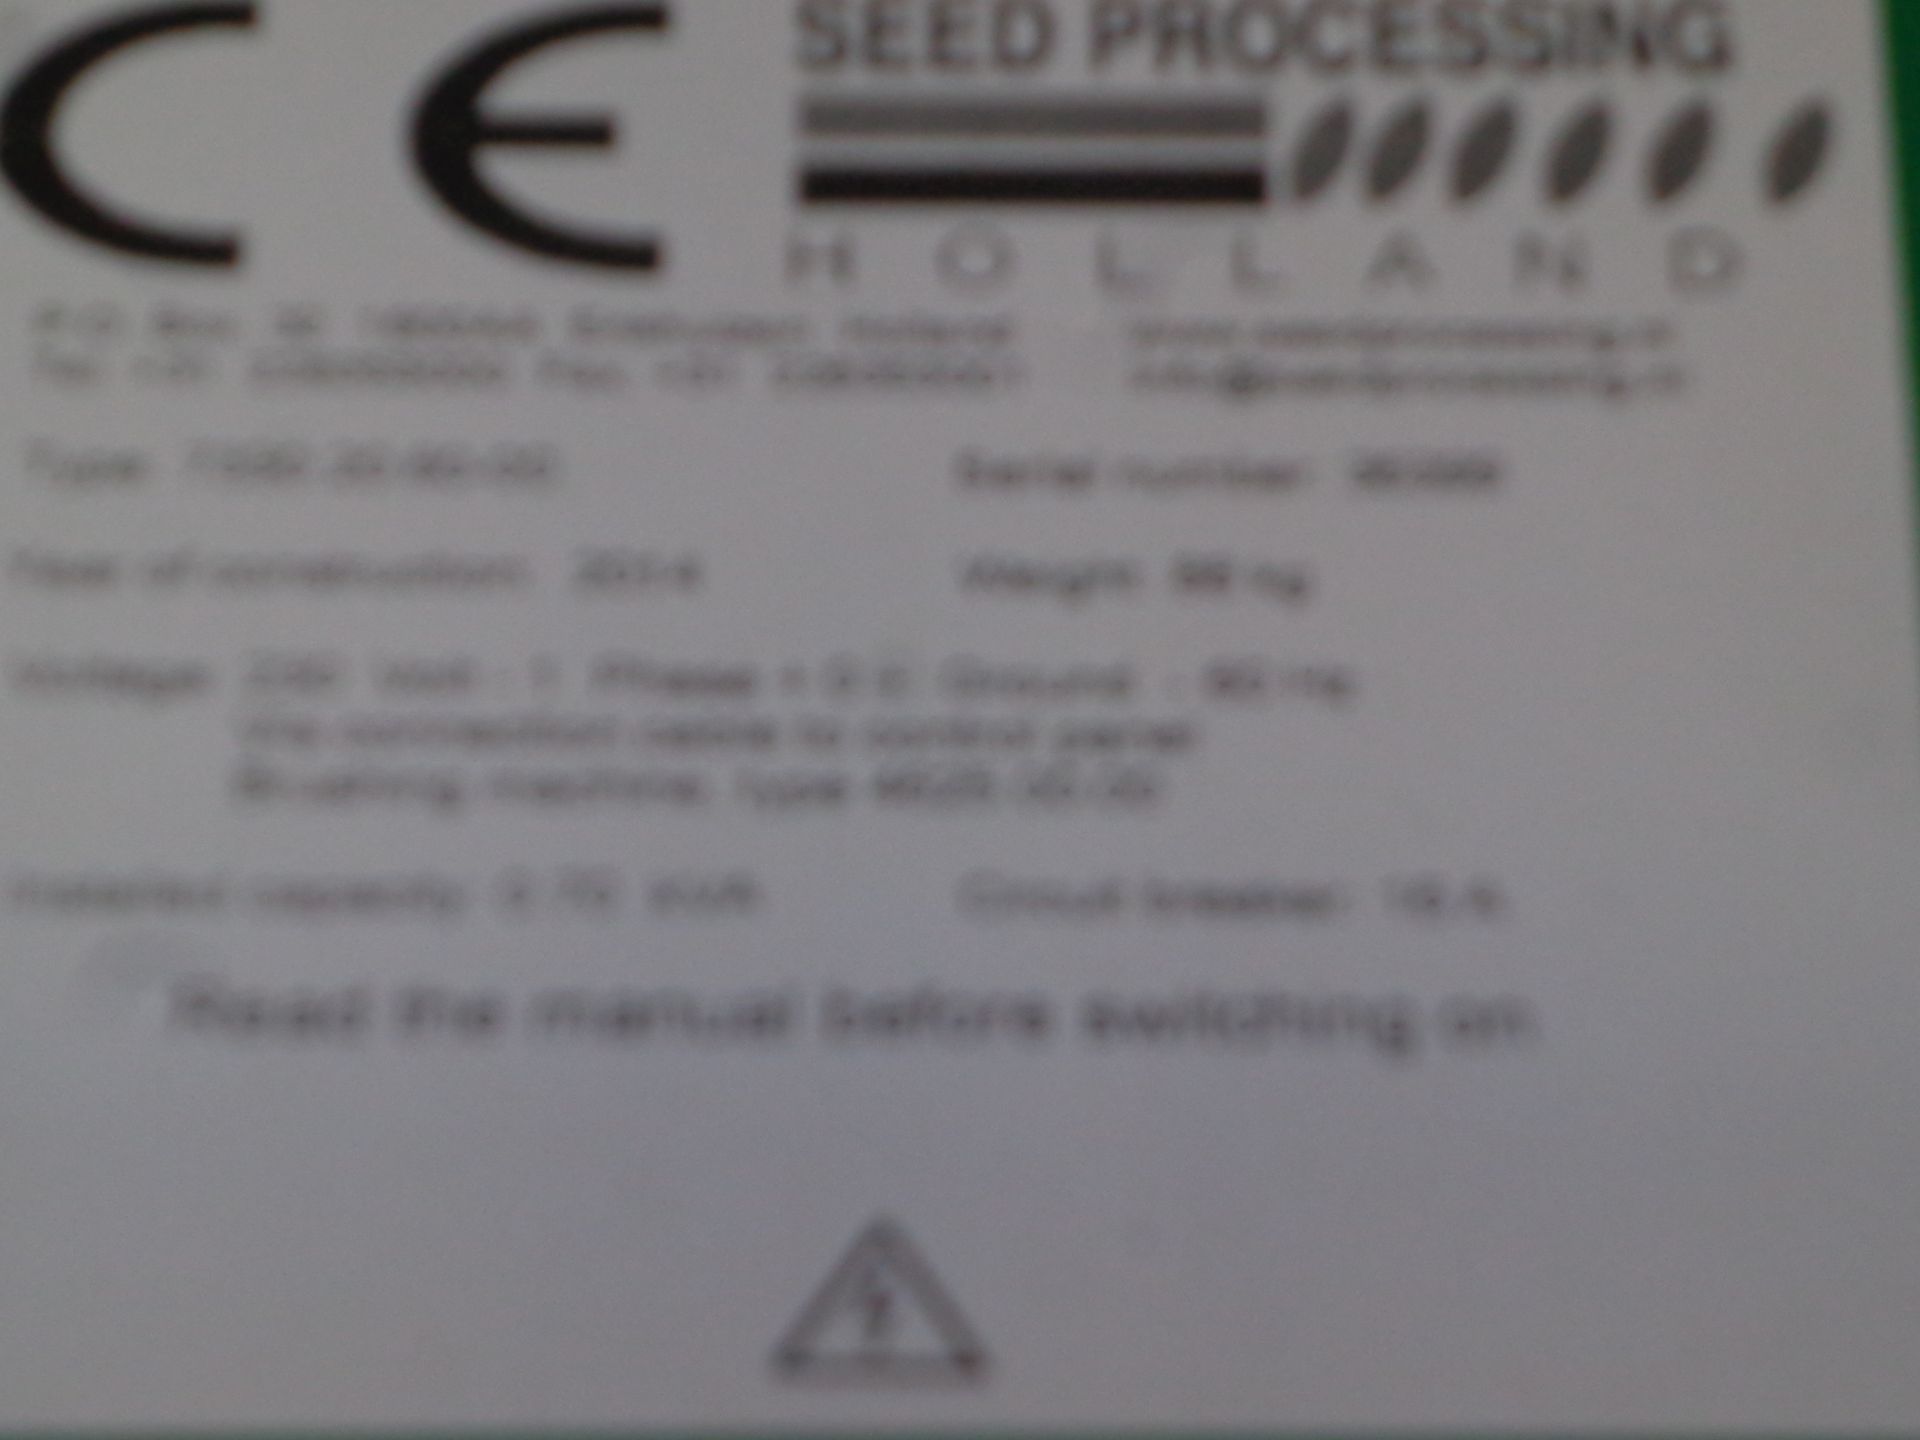 HOLLAND 4625.00.00 SEED PROCESSOR MACH# 36401 - Image 4 of 6